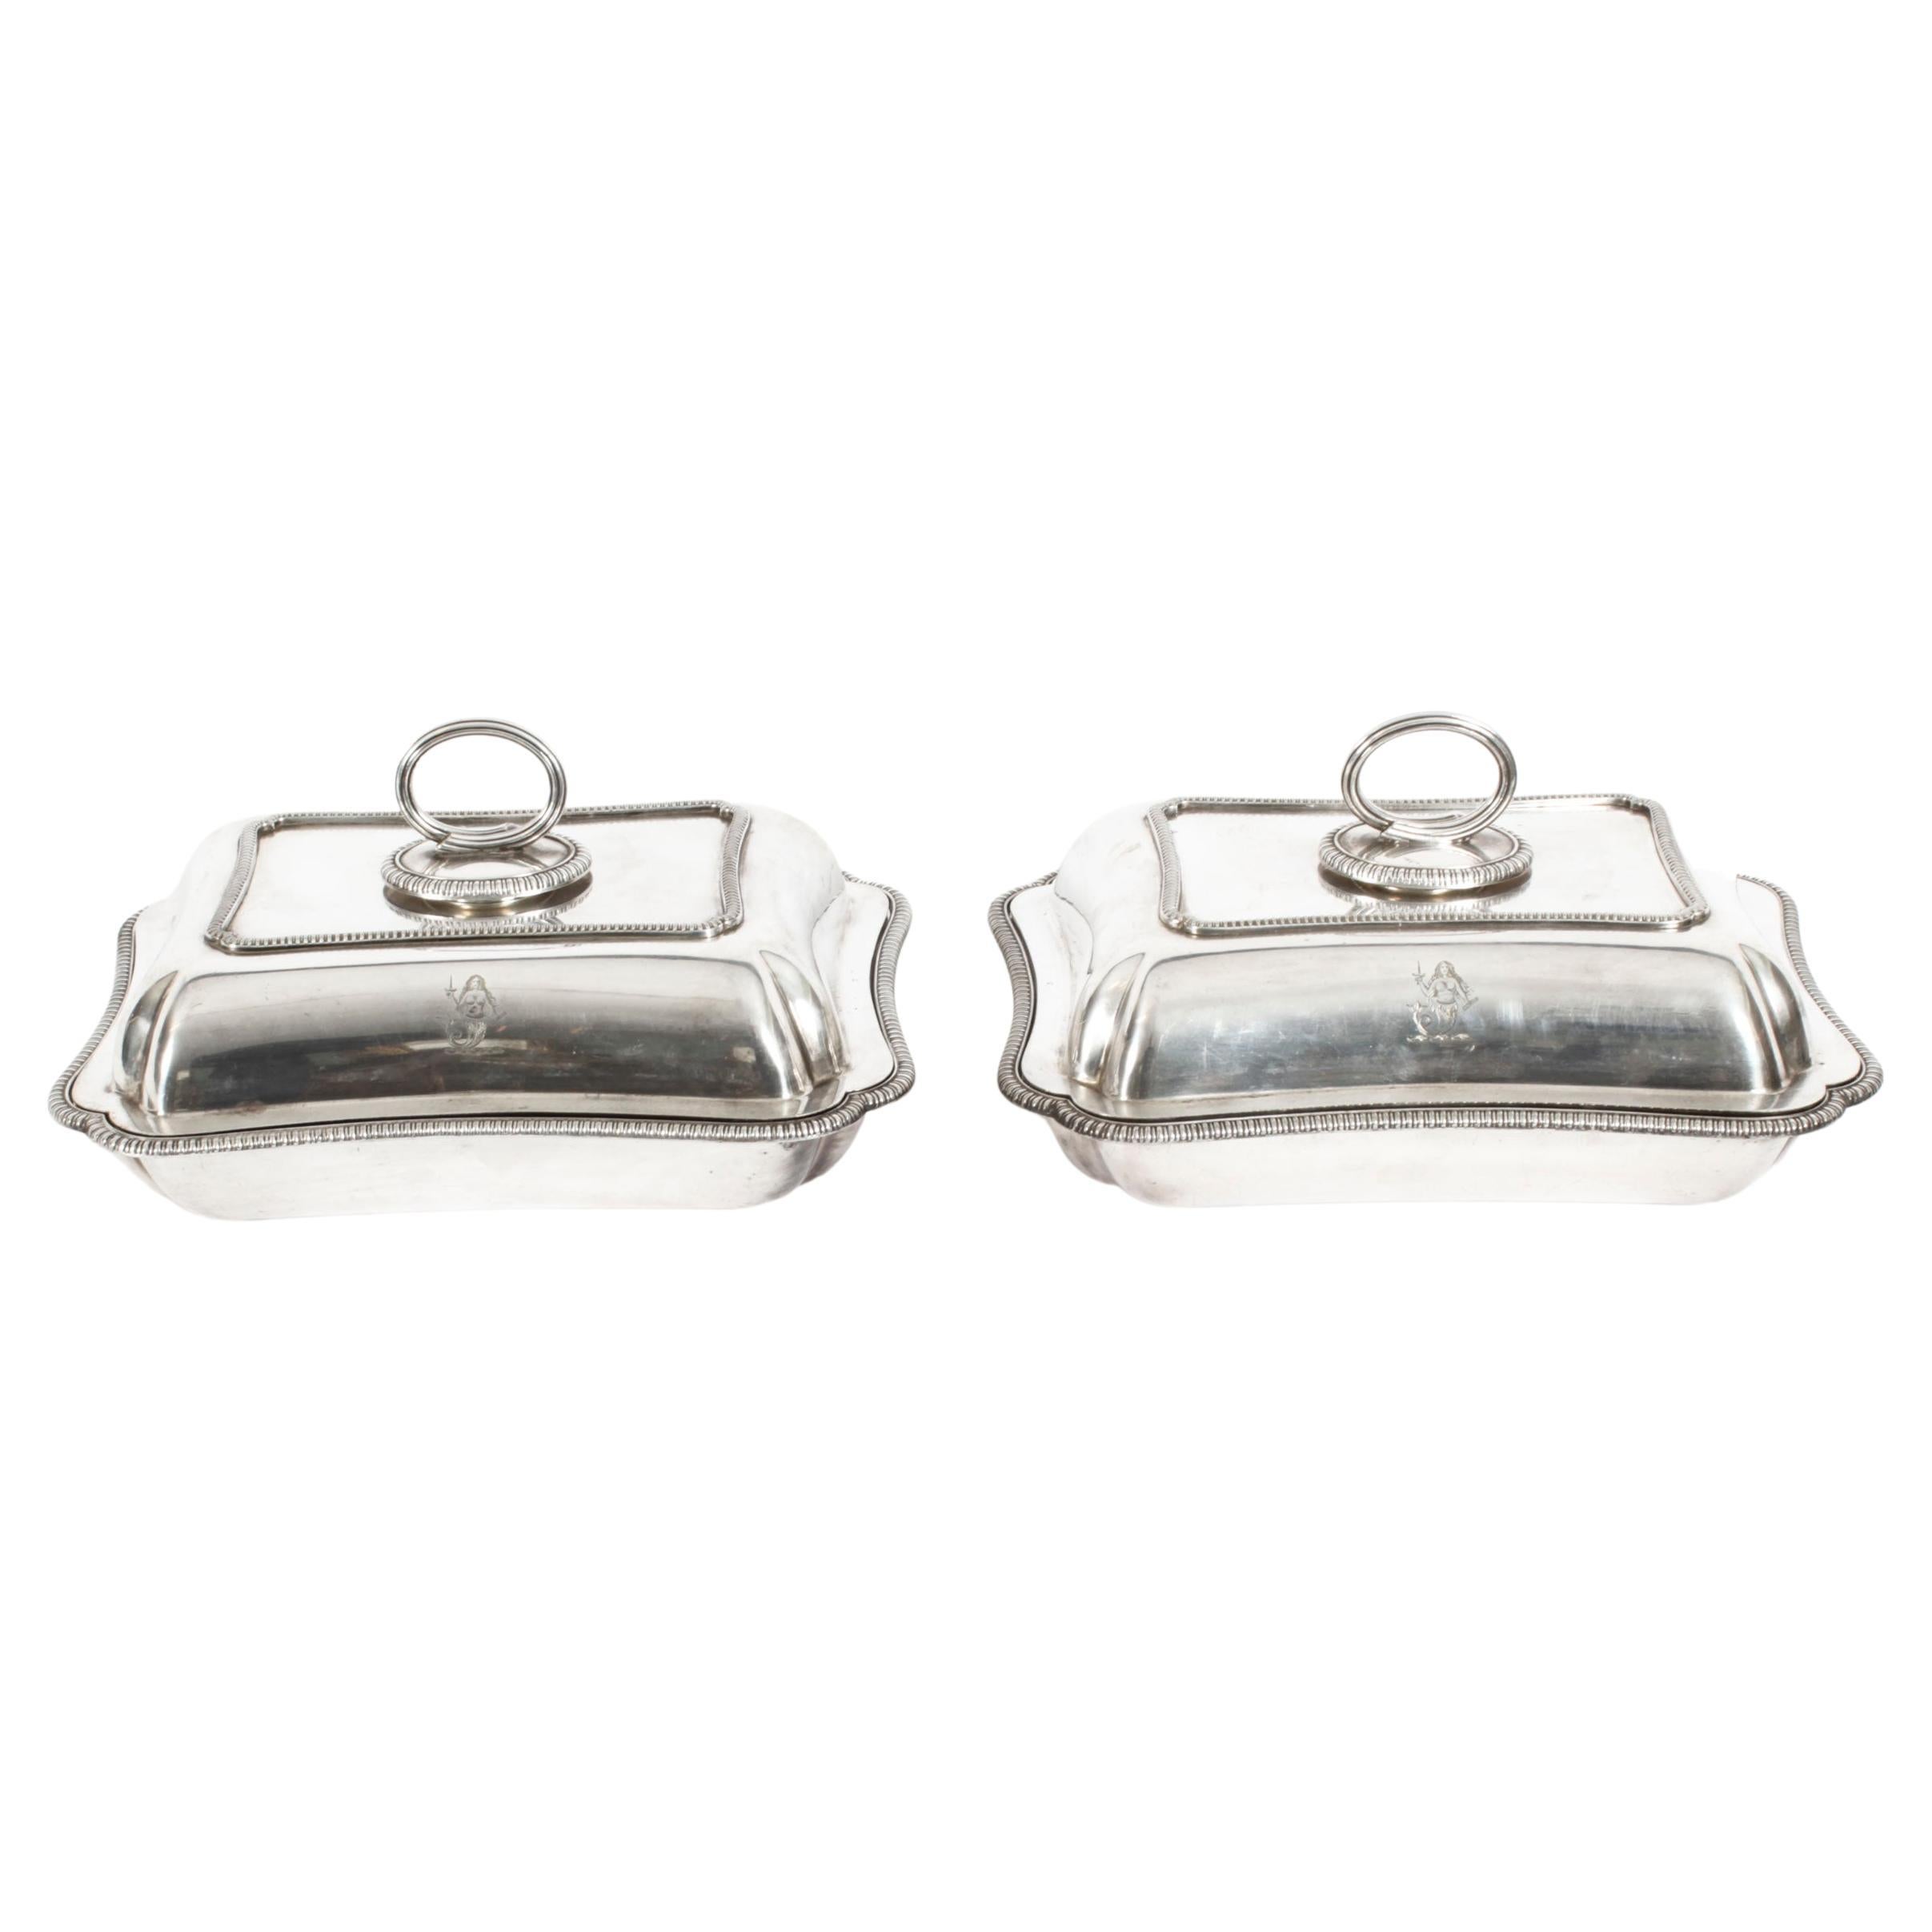 Antique Pair Silver Plated Entree Dishes Elkington, Dated 1888 19th Century For Sale